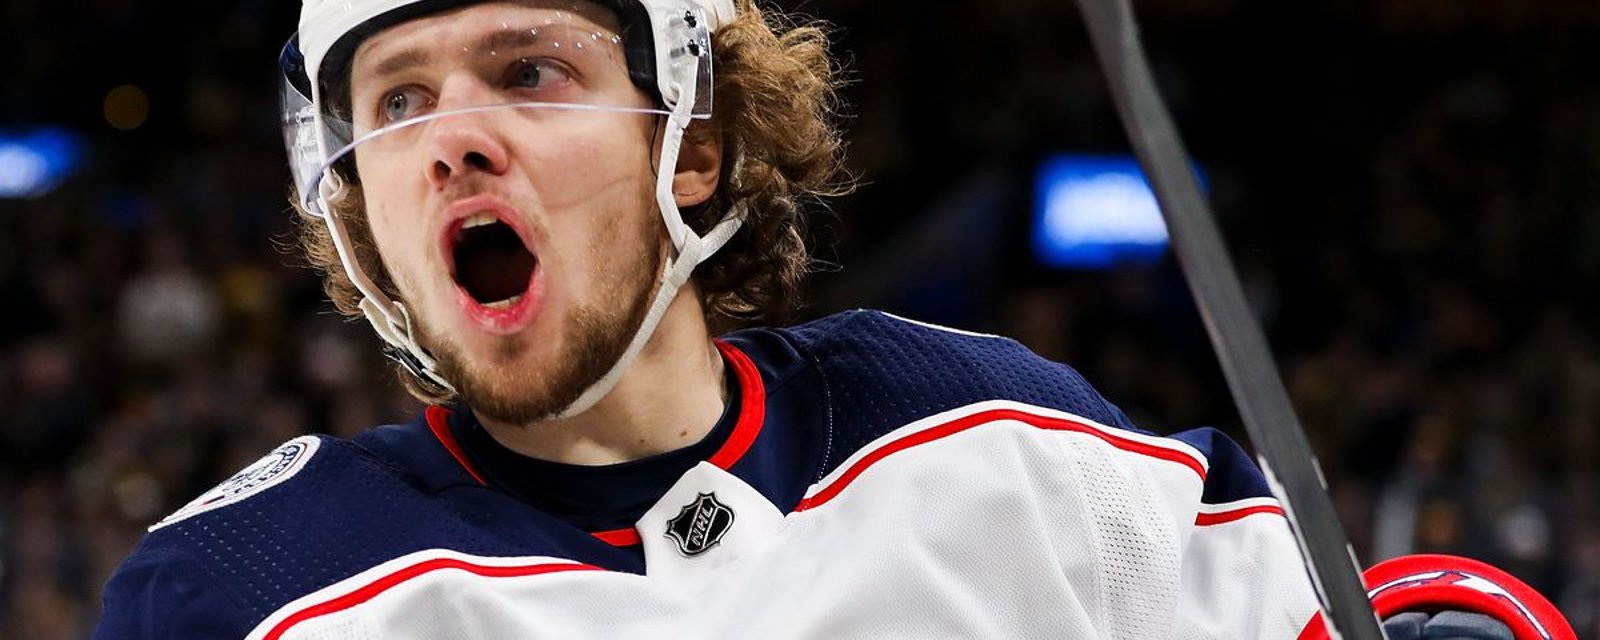 Panarin gets in trouble over weird tattoo 